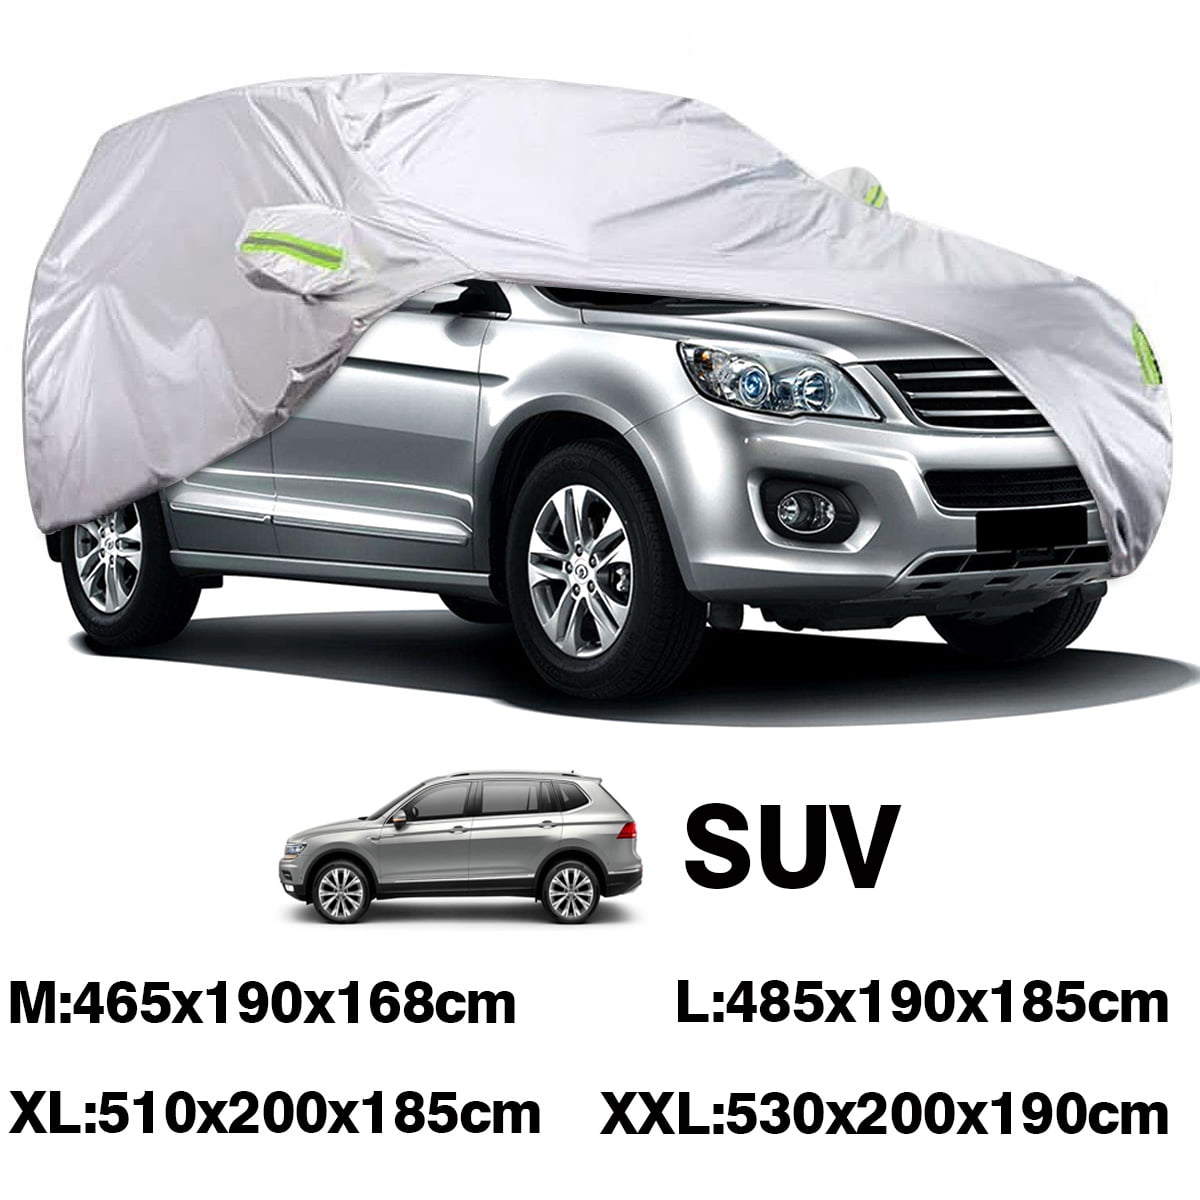 SUV Car Cover CIVOSE Waterproof All Weather 6 Layers 193-208 Full Exterior Car Covers for Automobiles All Weather Waterproof Universal Car Cover for Snow UV Hail Protector with Soft Lining for SUV 